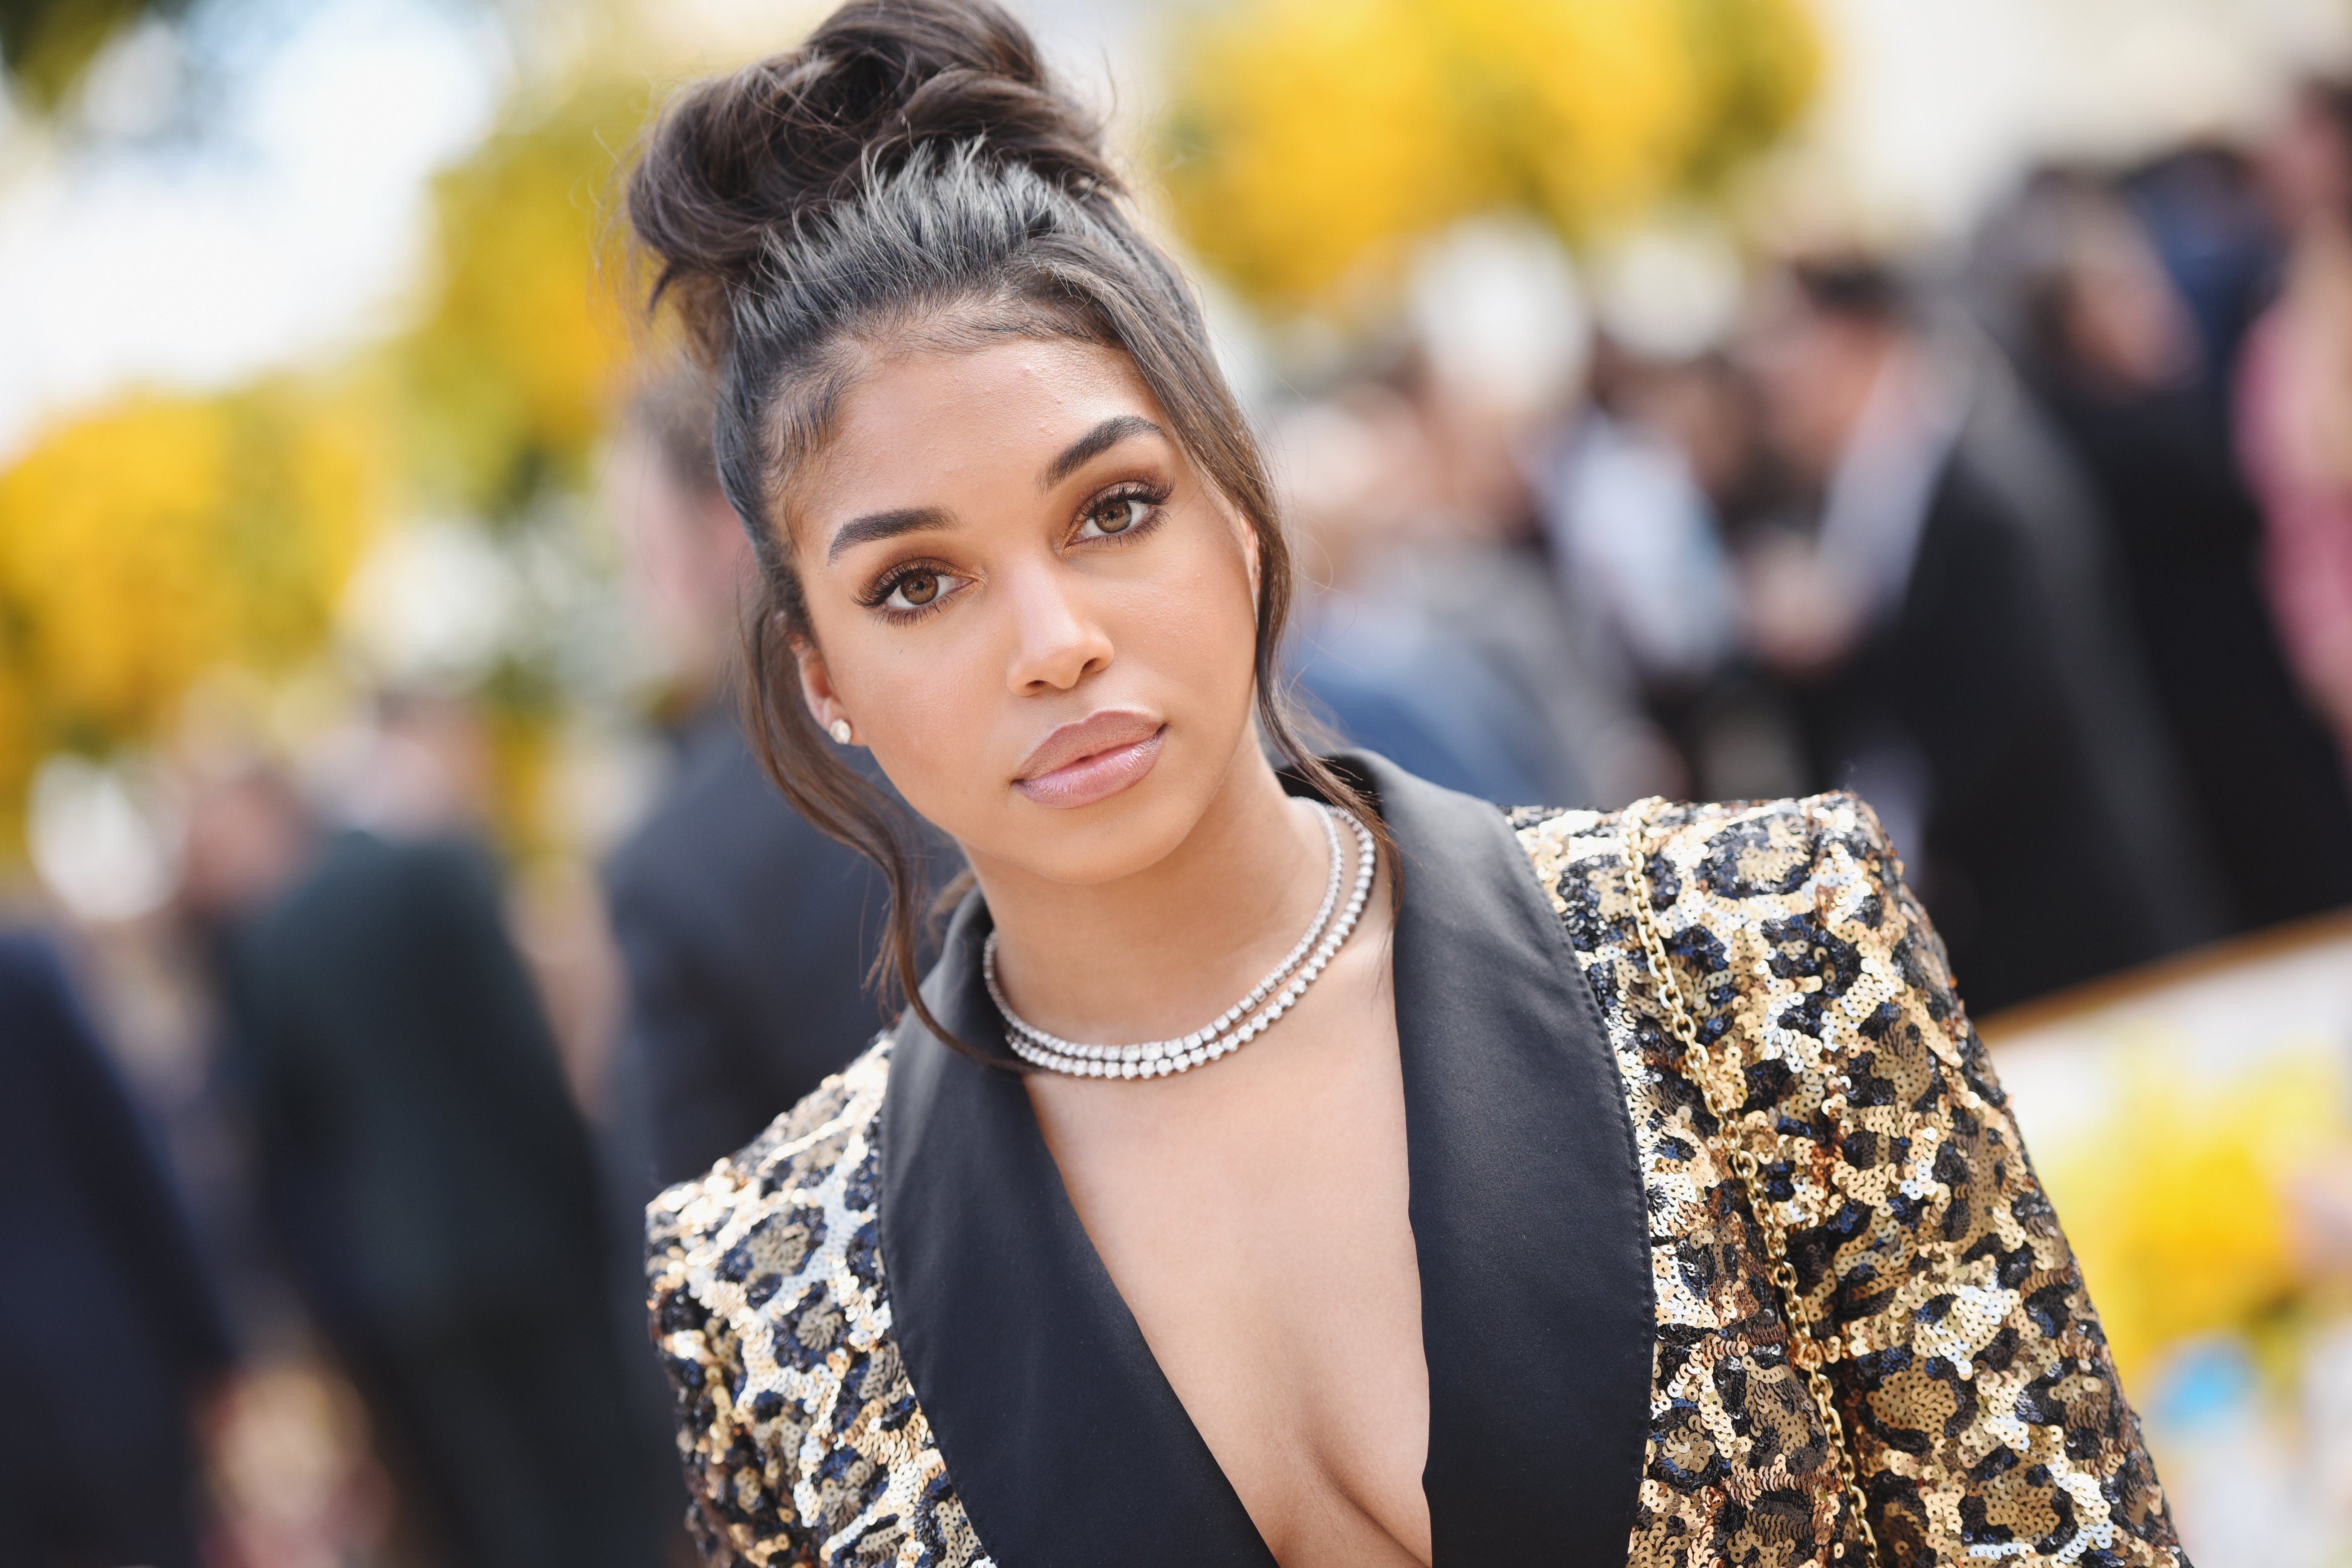 Lori Harvey attends the Roc Nation's "The Brunch" on February 9, 2019. | Photos: Getty Images